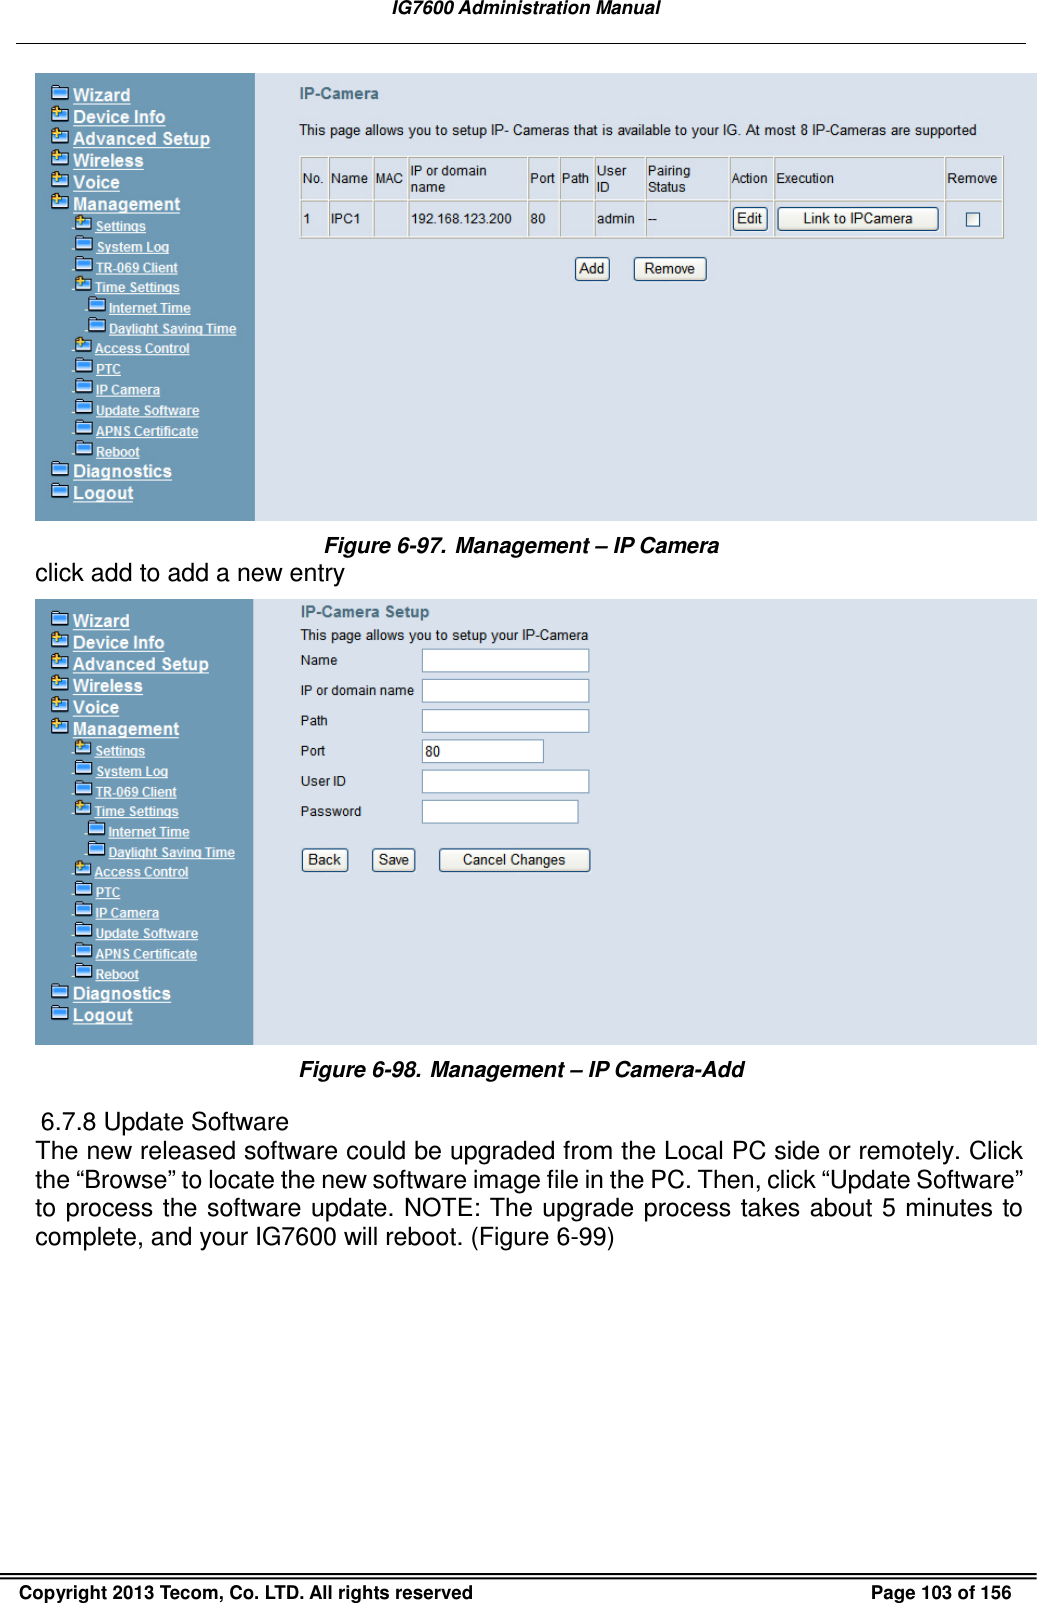   IG7600 Administration Manual  Copyright 2013 Tecom, Co. LTD. All rights reserved  Page 103 of 156  Figure 6-97. Management – IP Camera click add to add a new entry  Figure 6-98. Management – IP Camera-Add 6.7.8 Update Software The new released software could be upgraded from the Local PC side or remotely. Click the “Browse” to locate the new software image file in the PC. Then, click “Update Software” to process the software update. NOTE: The upgrade process takes about 5 minutes to complete, and your IG7600 will reboot. (Figure 6-99) 